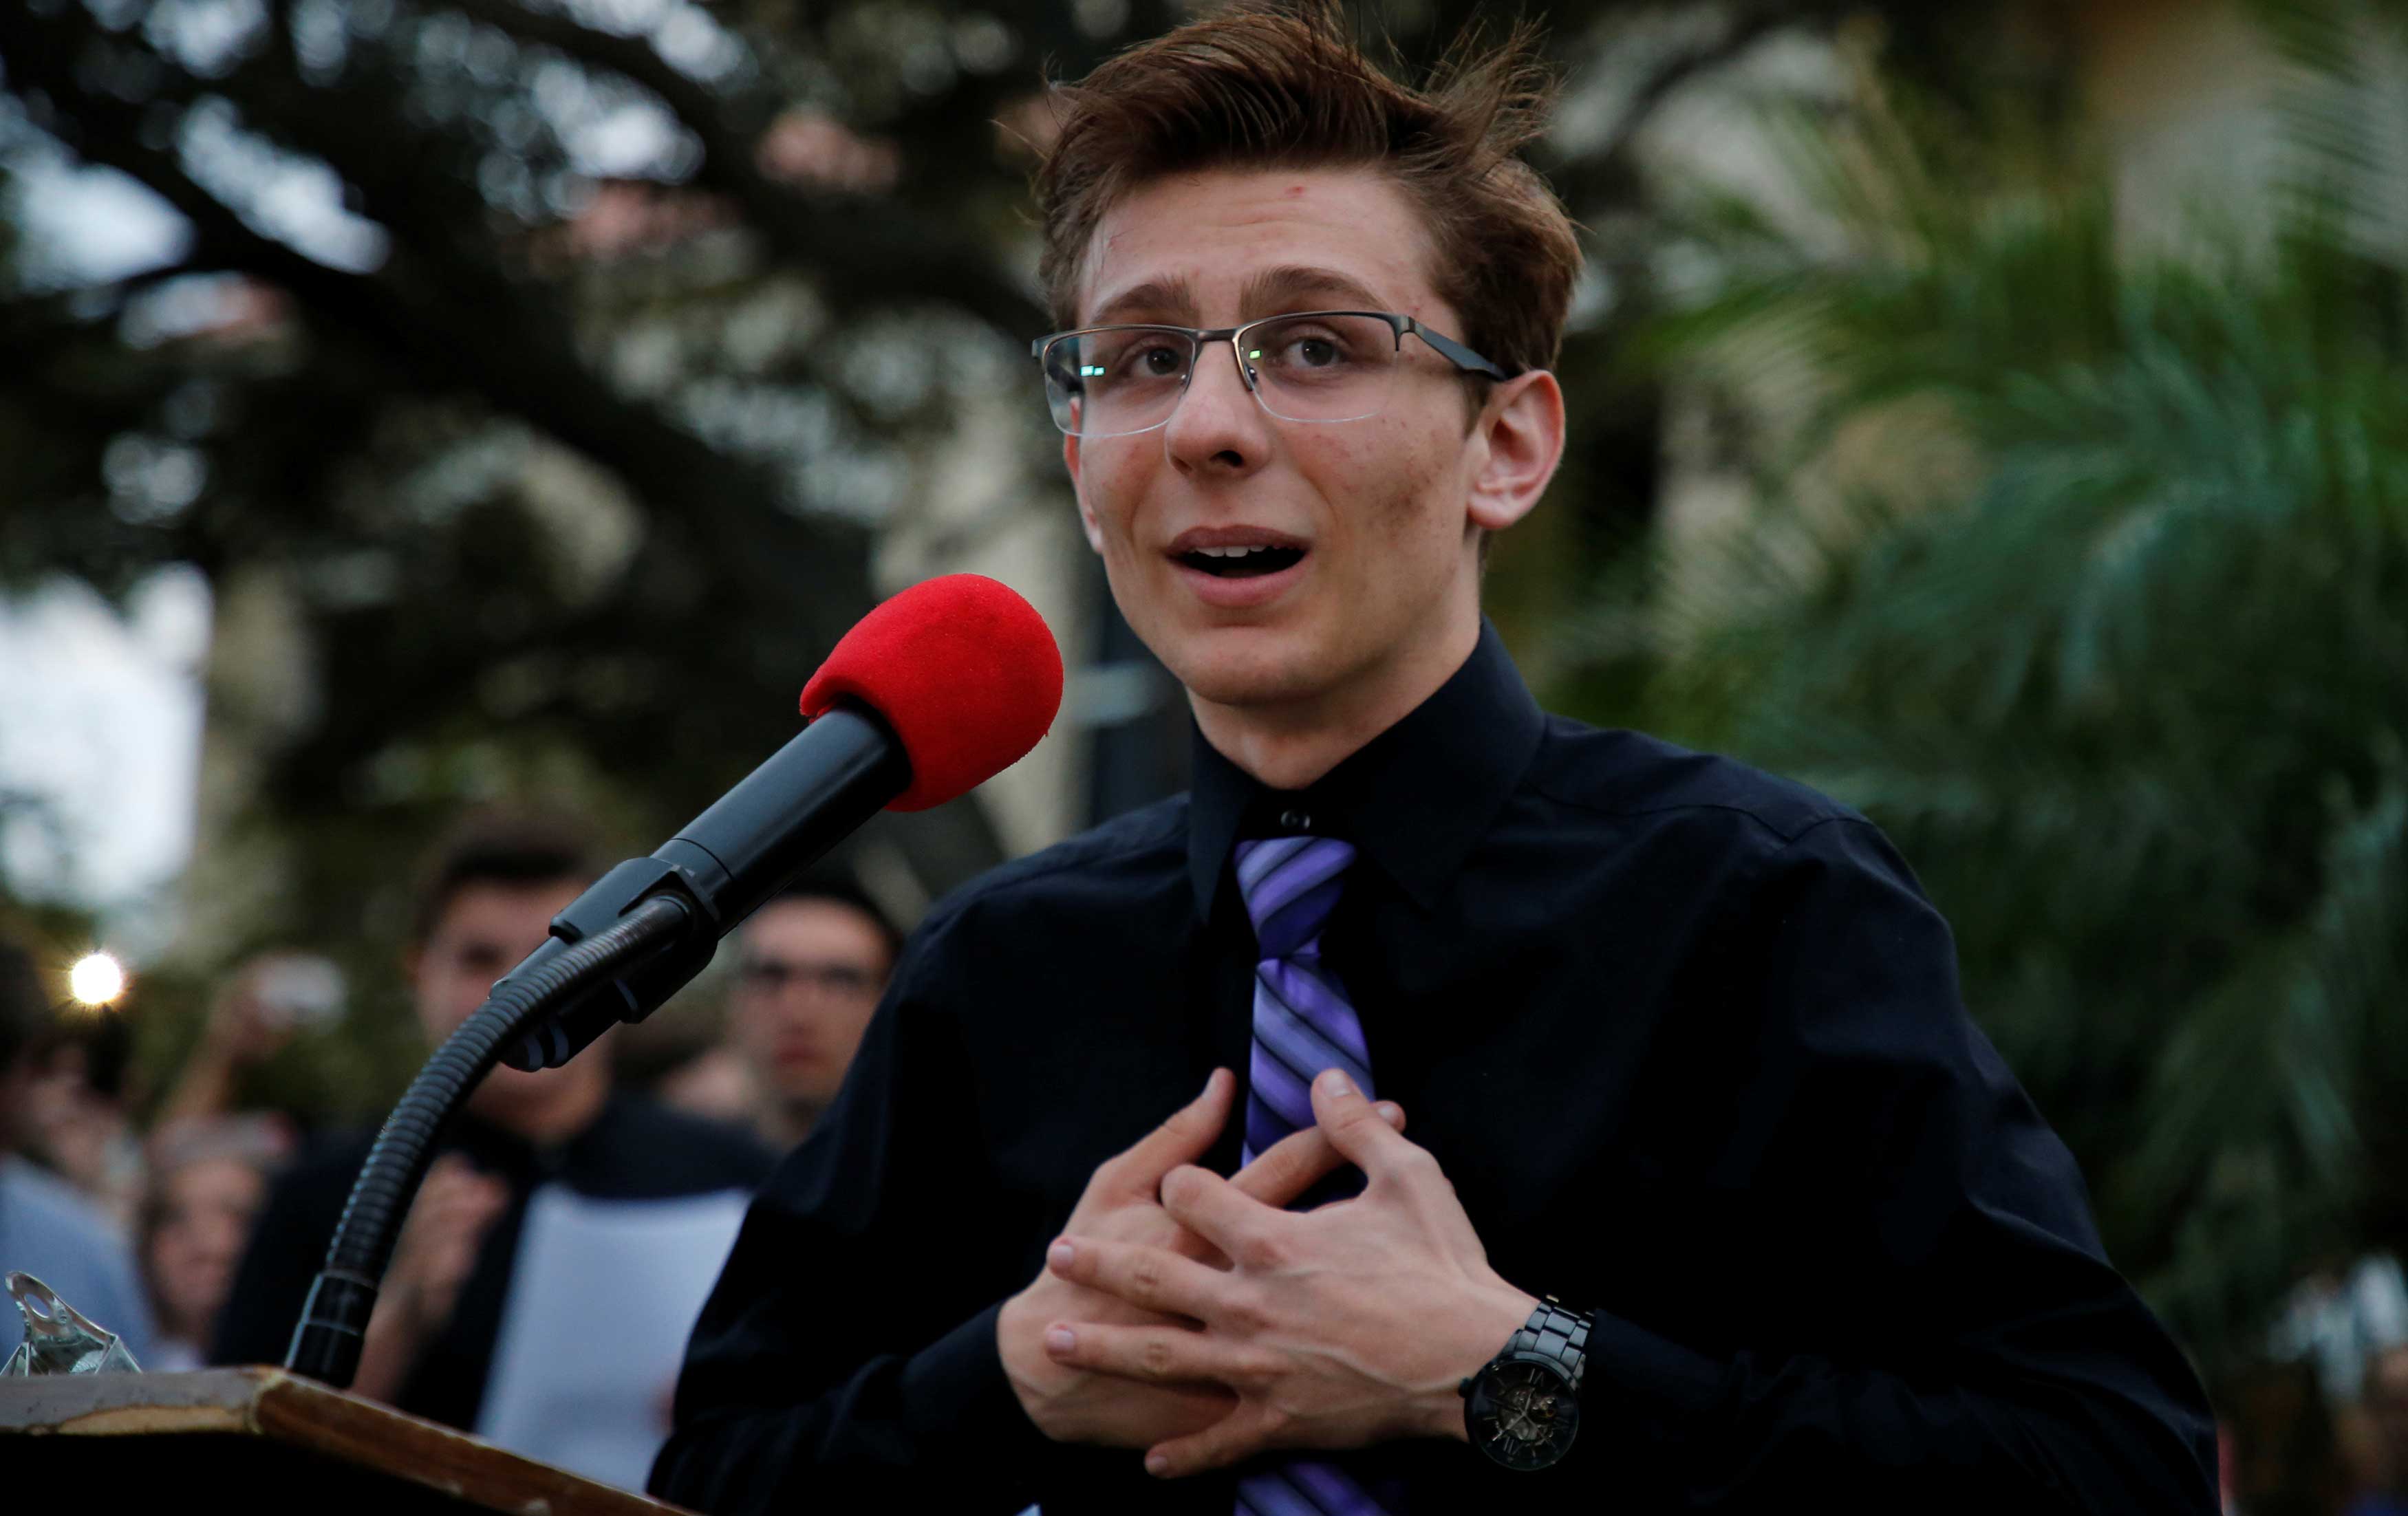 Dylan Baierlein, a student at Marjory Stoneman Douglas High, speaks to protesters at a Call To Action Against Gun Violence rally by the Interfaith League and others in Delray Beach, Florida.